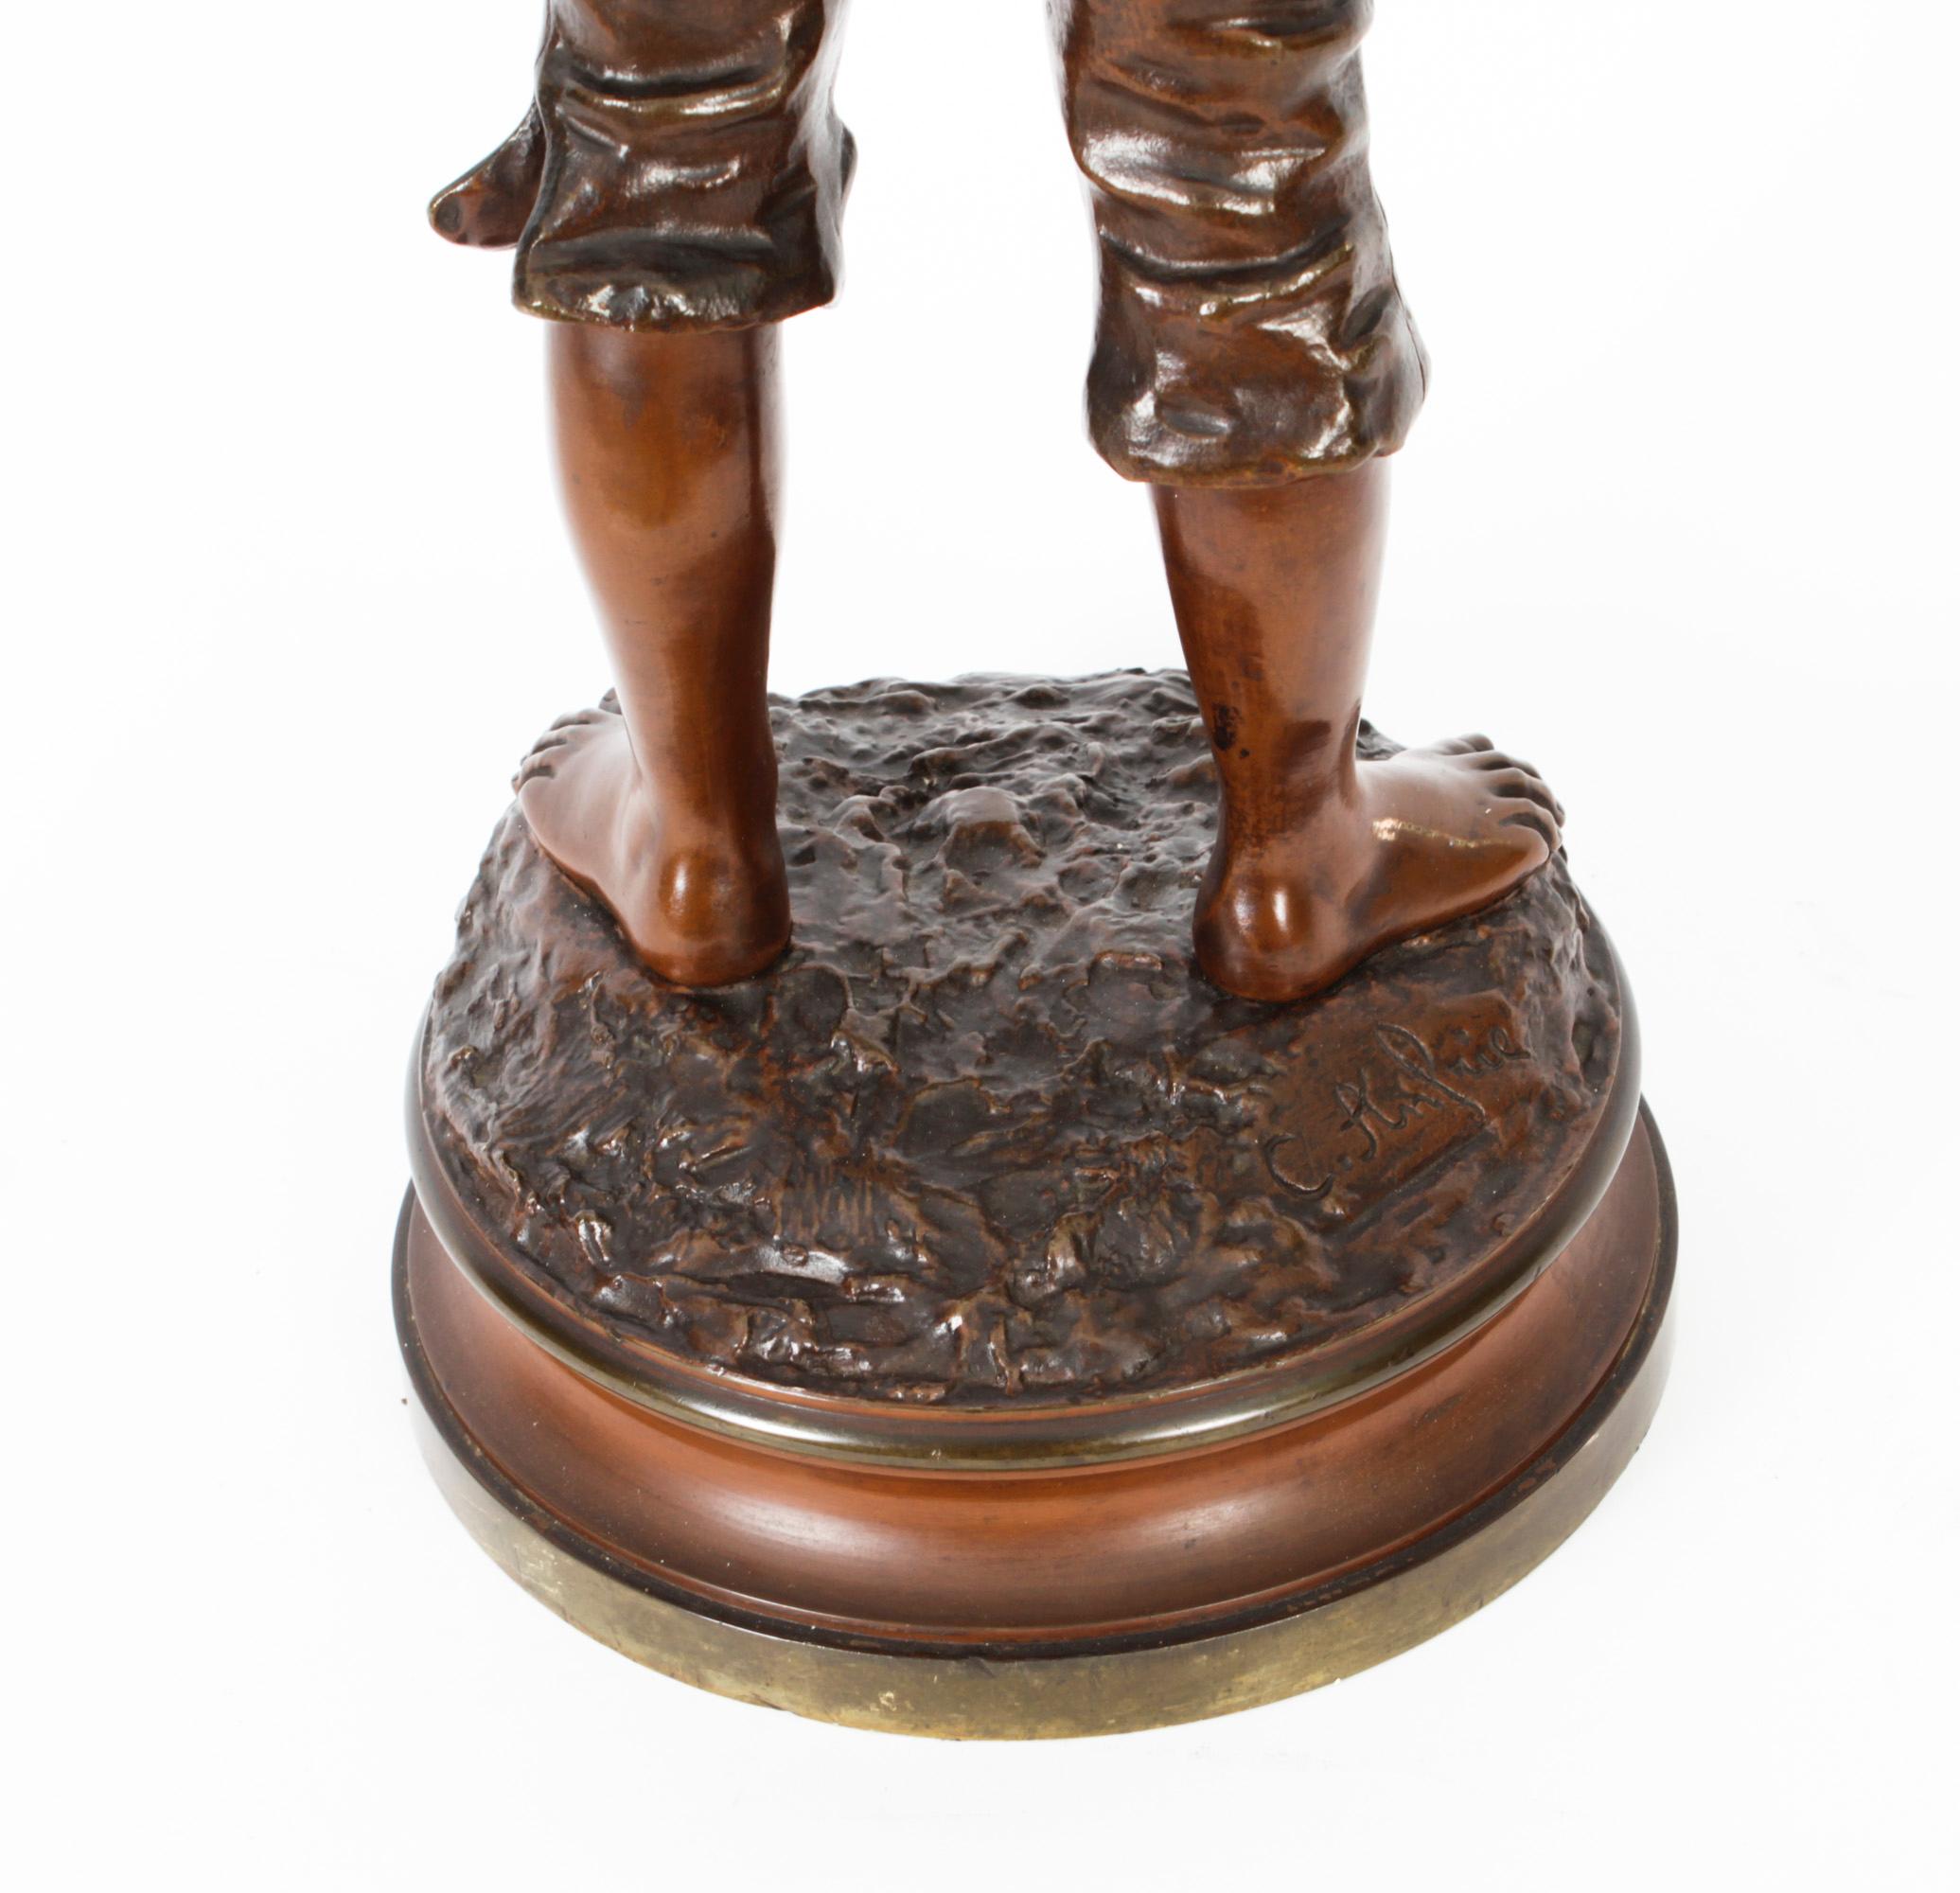 Antique Bronze Street Urchin by Charles Anfrie, 1833-1905', 19th Century For Sale 8